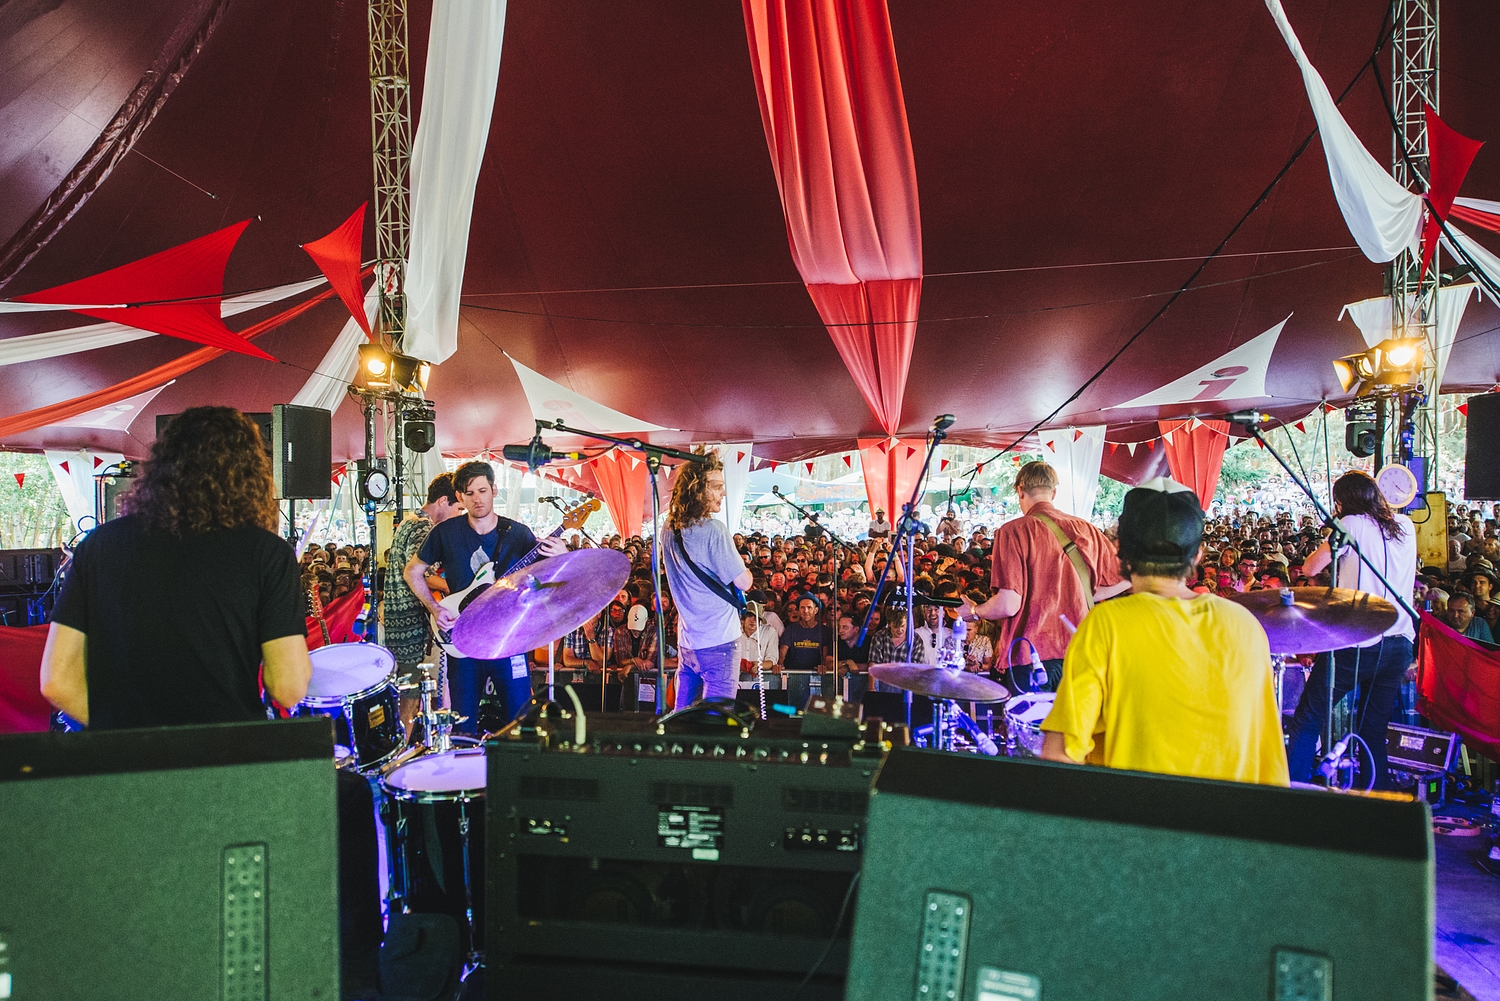 King Gizzard & The Lizard Wizard's vicious psychedelia takes root in the Latitude 2015 woods